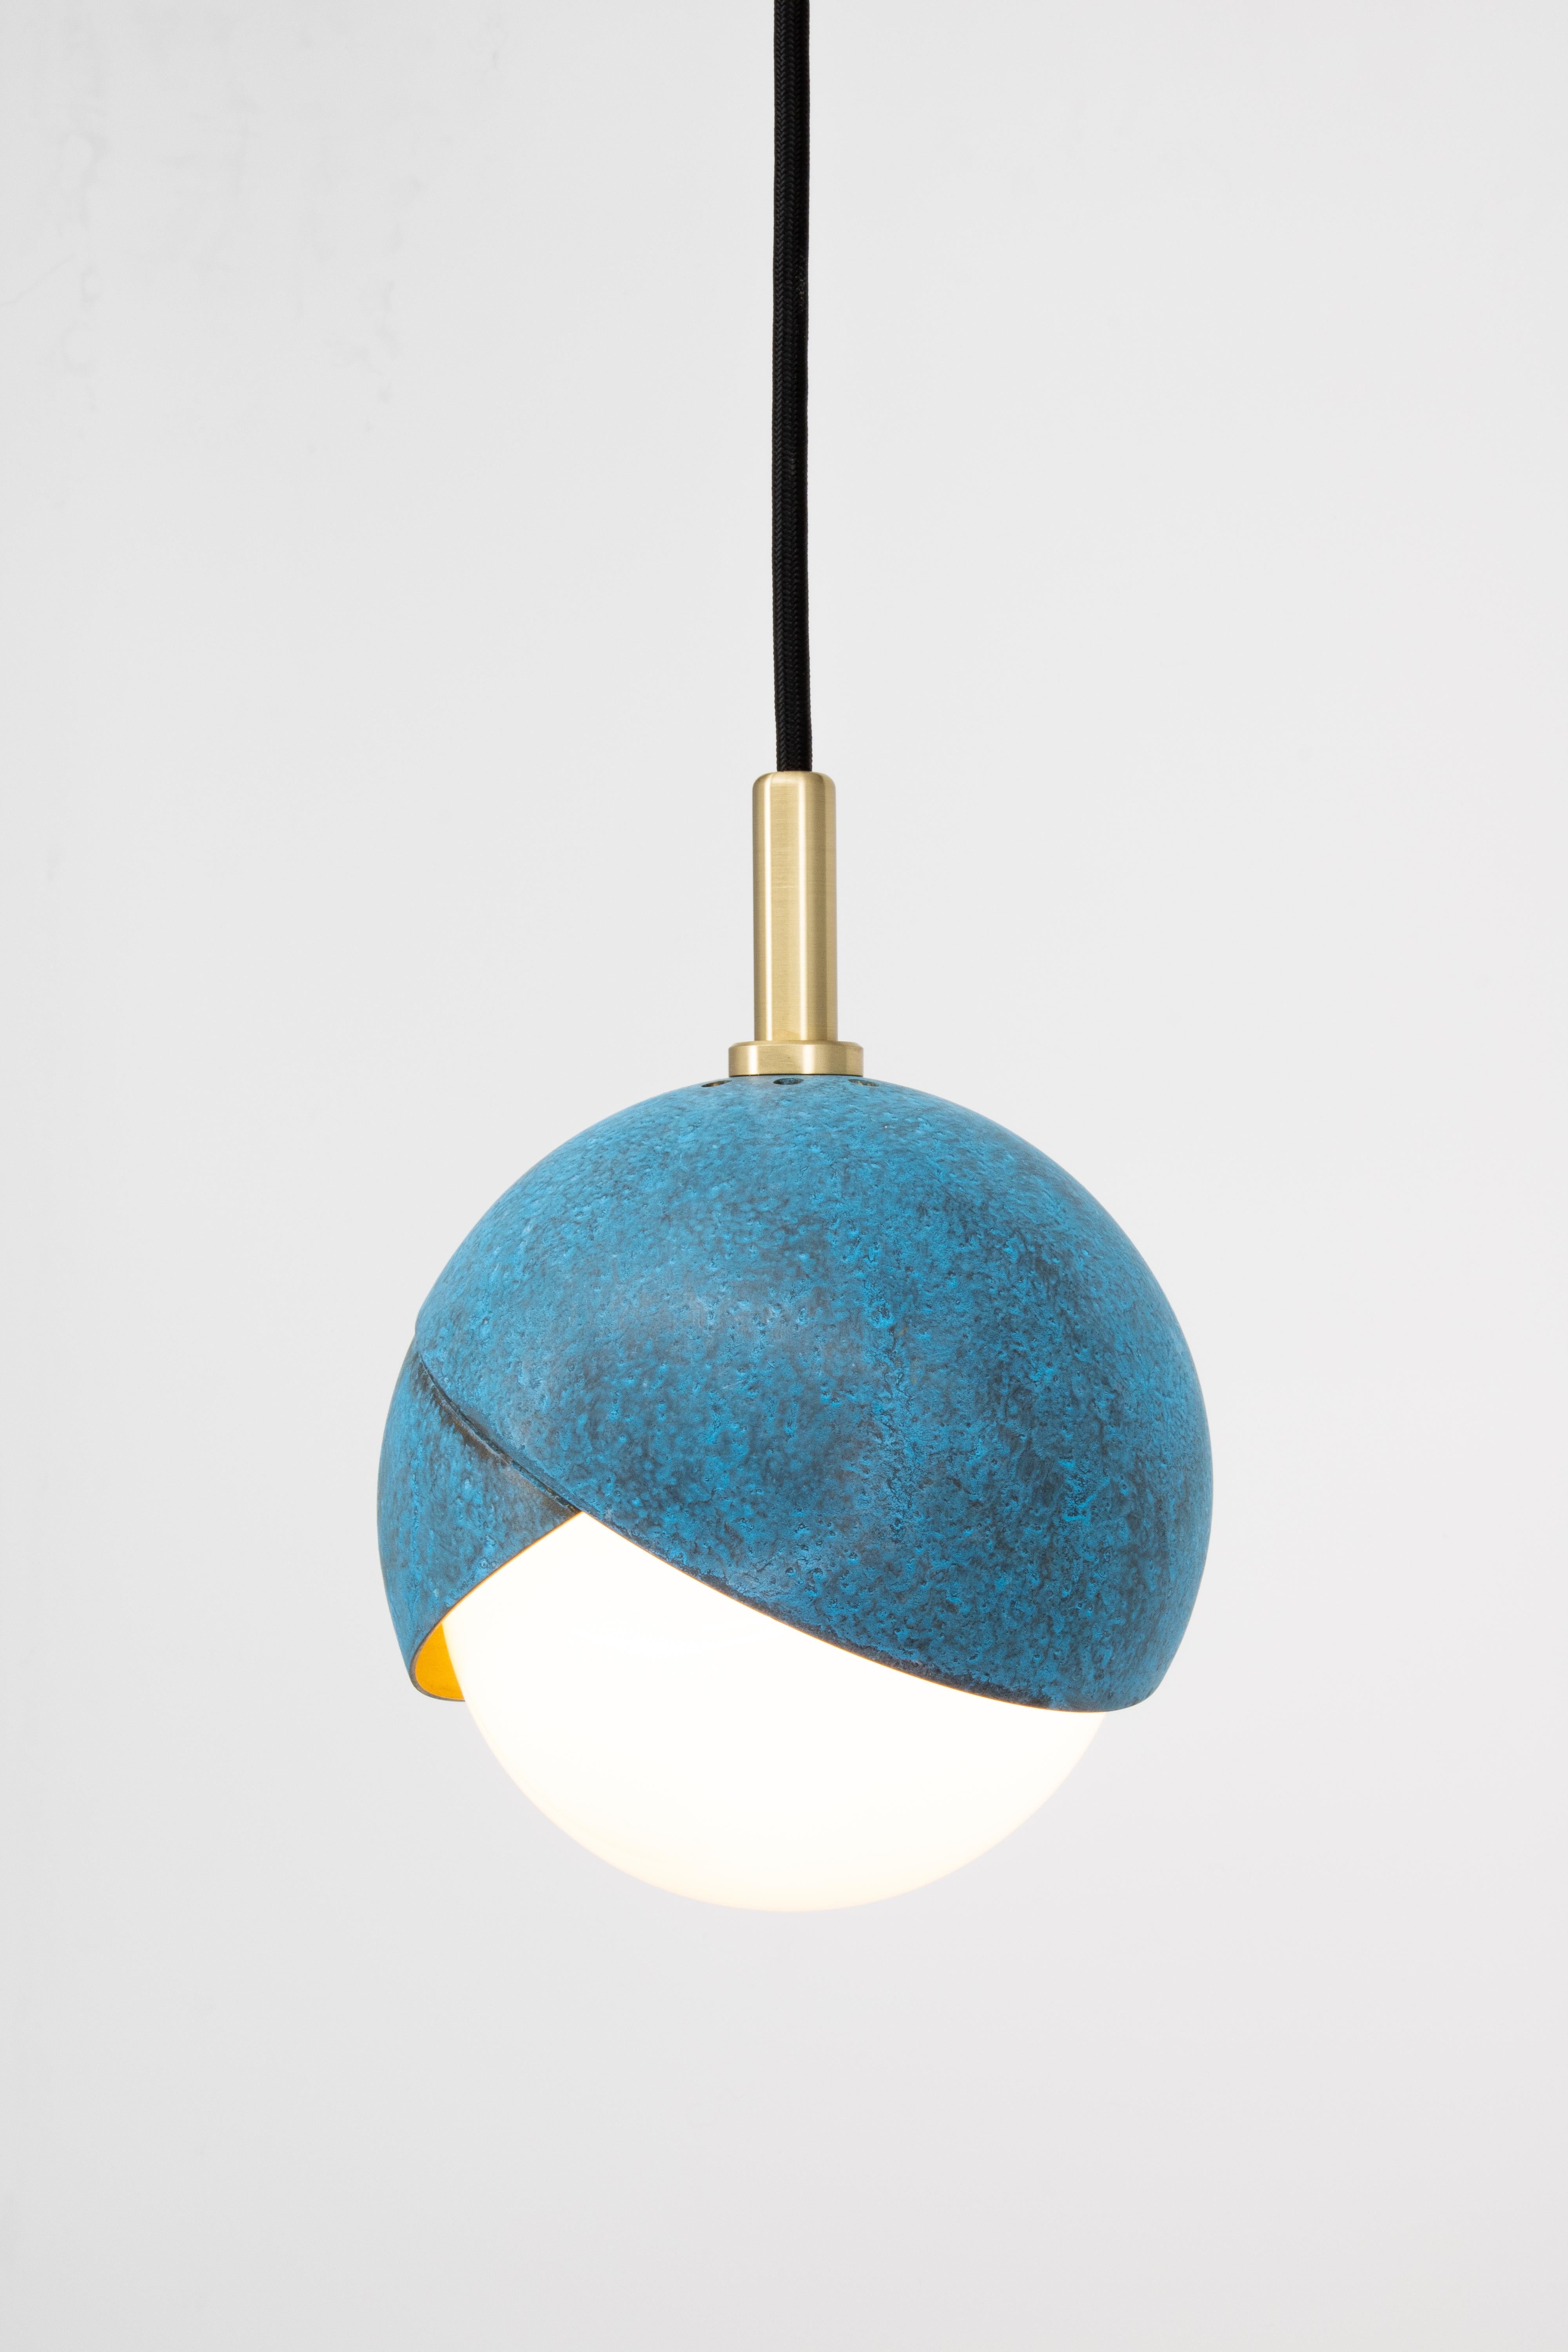 Other Benedict Pendant Light, Prussian Blue, Satin Brass Details, 9in diameter  For Sale